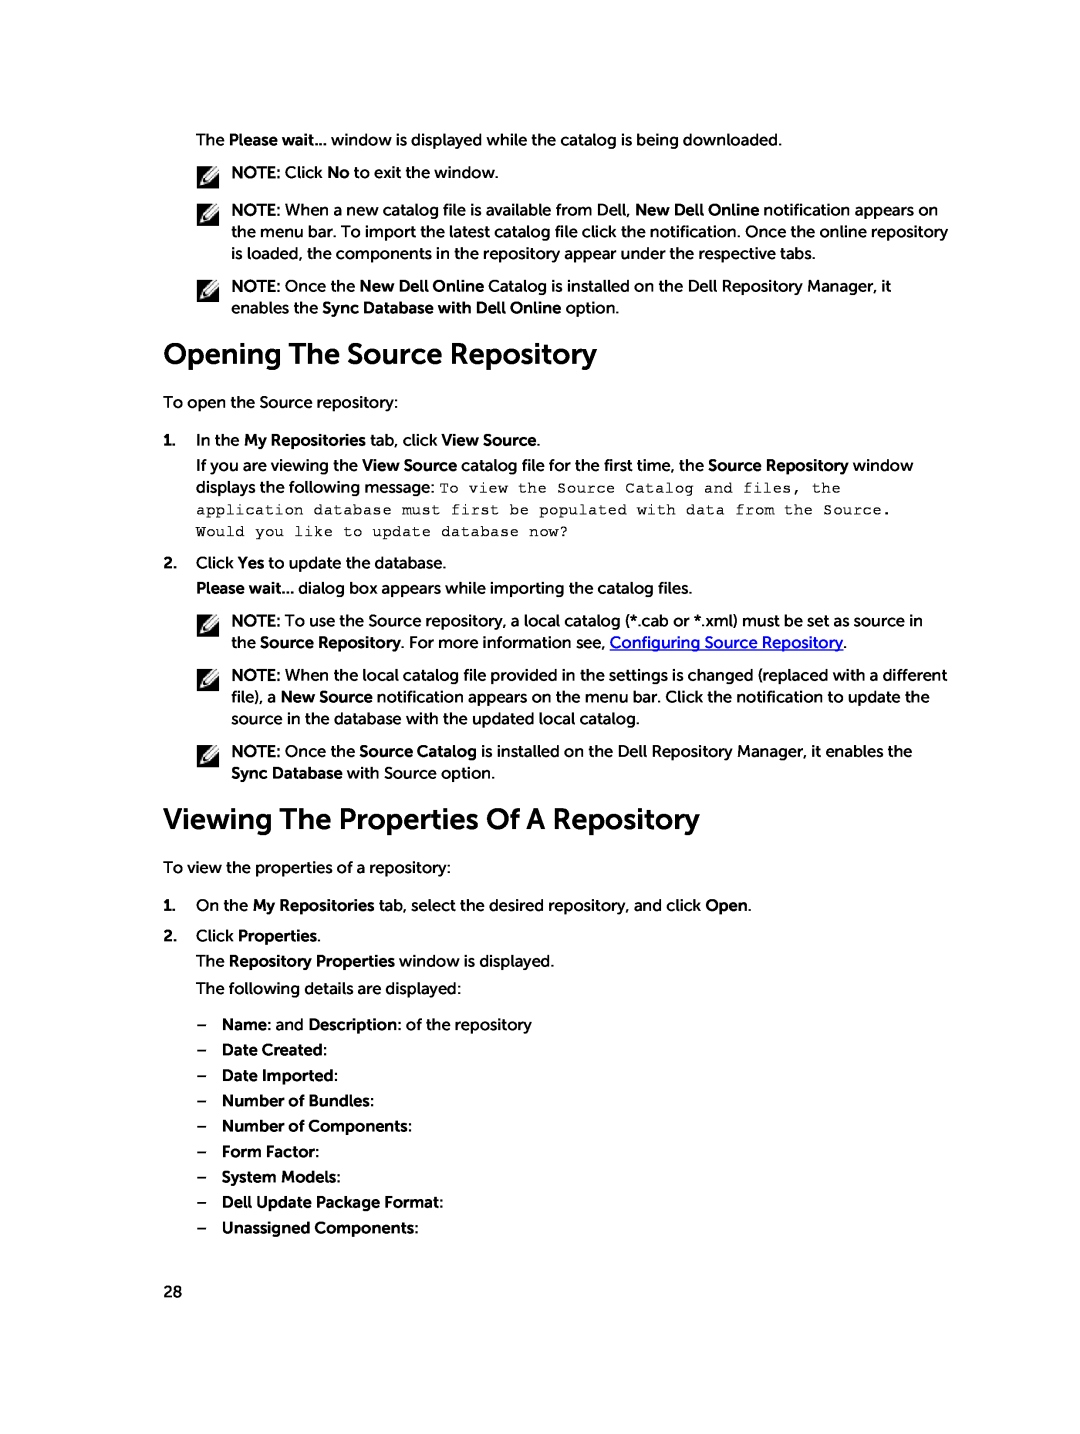 Dell 1.8 manual Opening The Source Repository, Viewing The Properties Of A Repository 